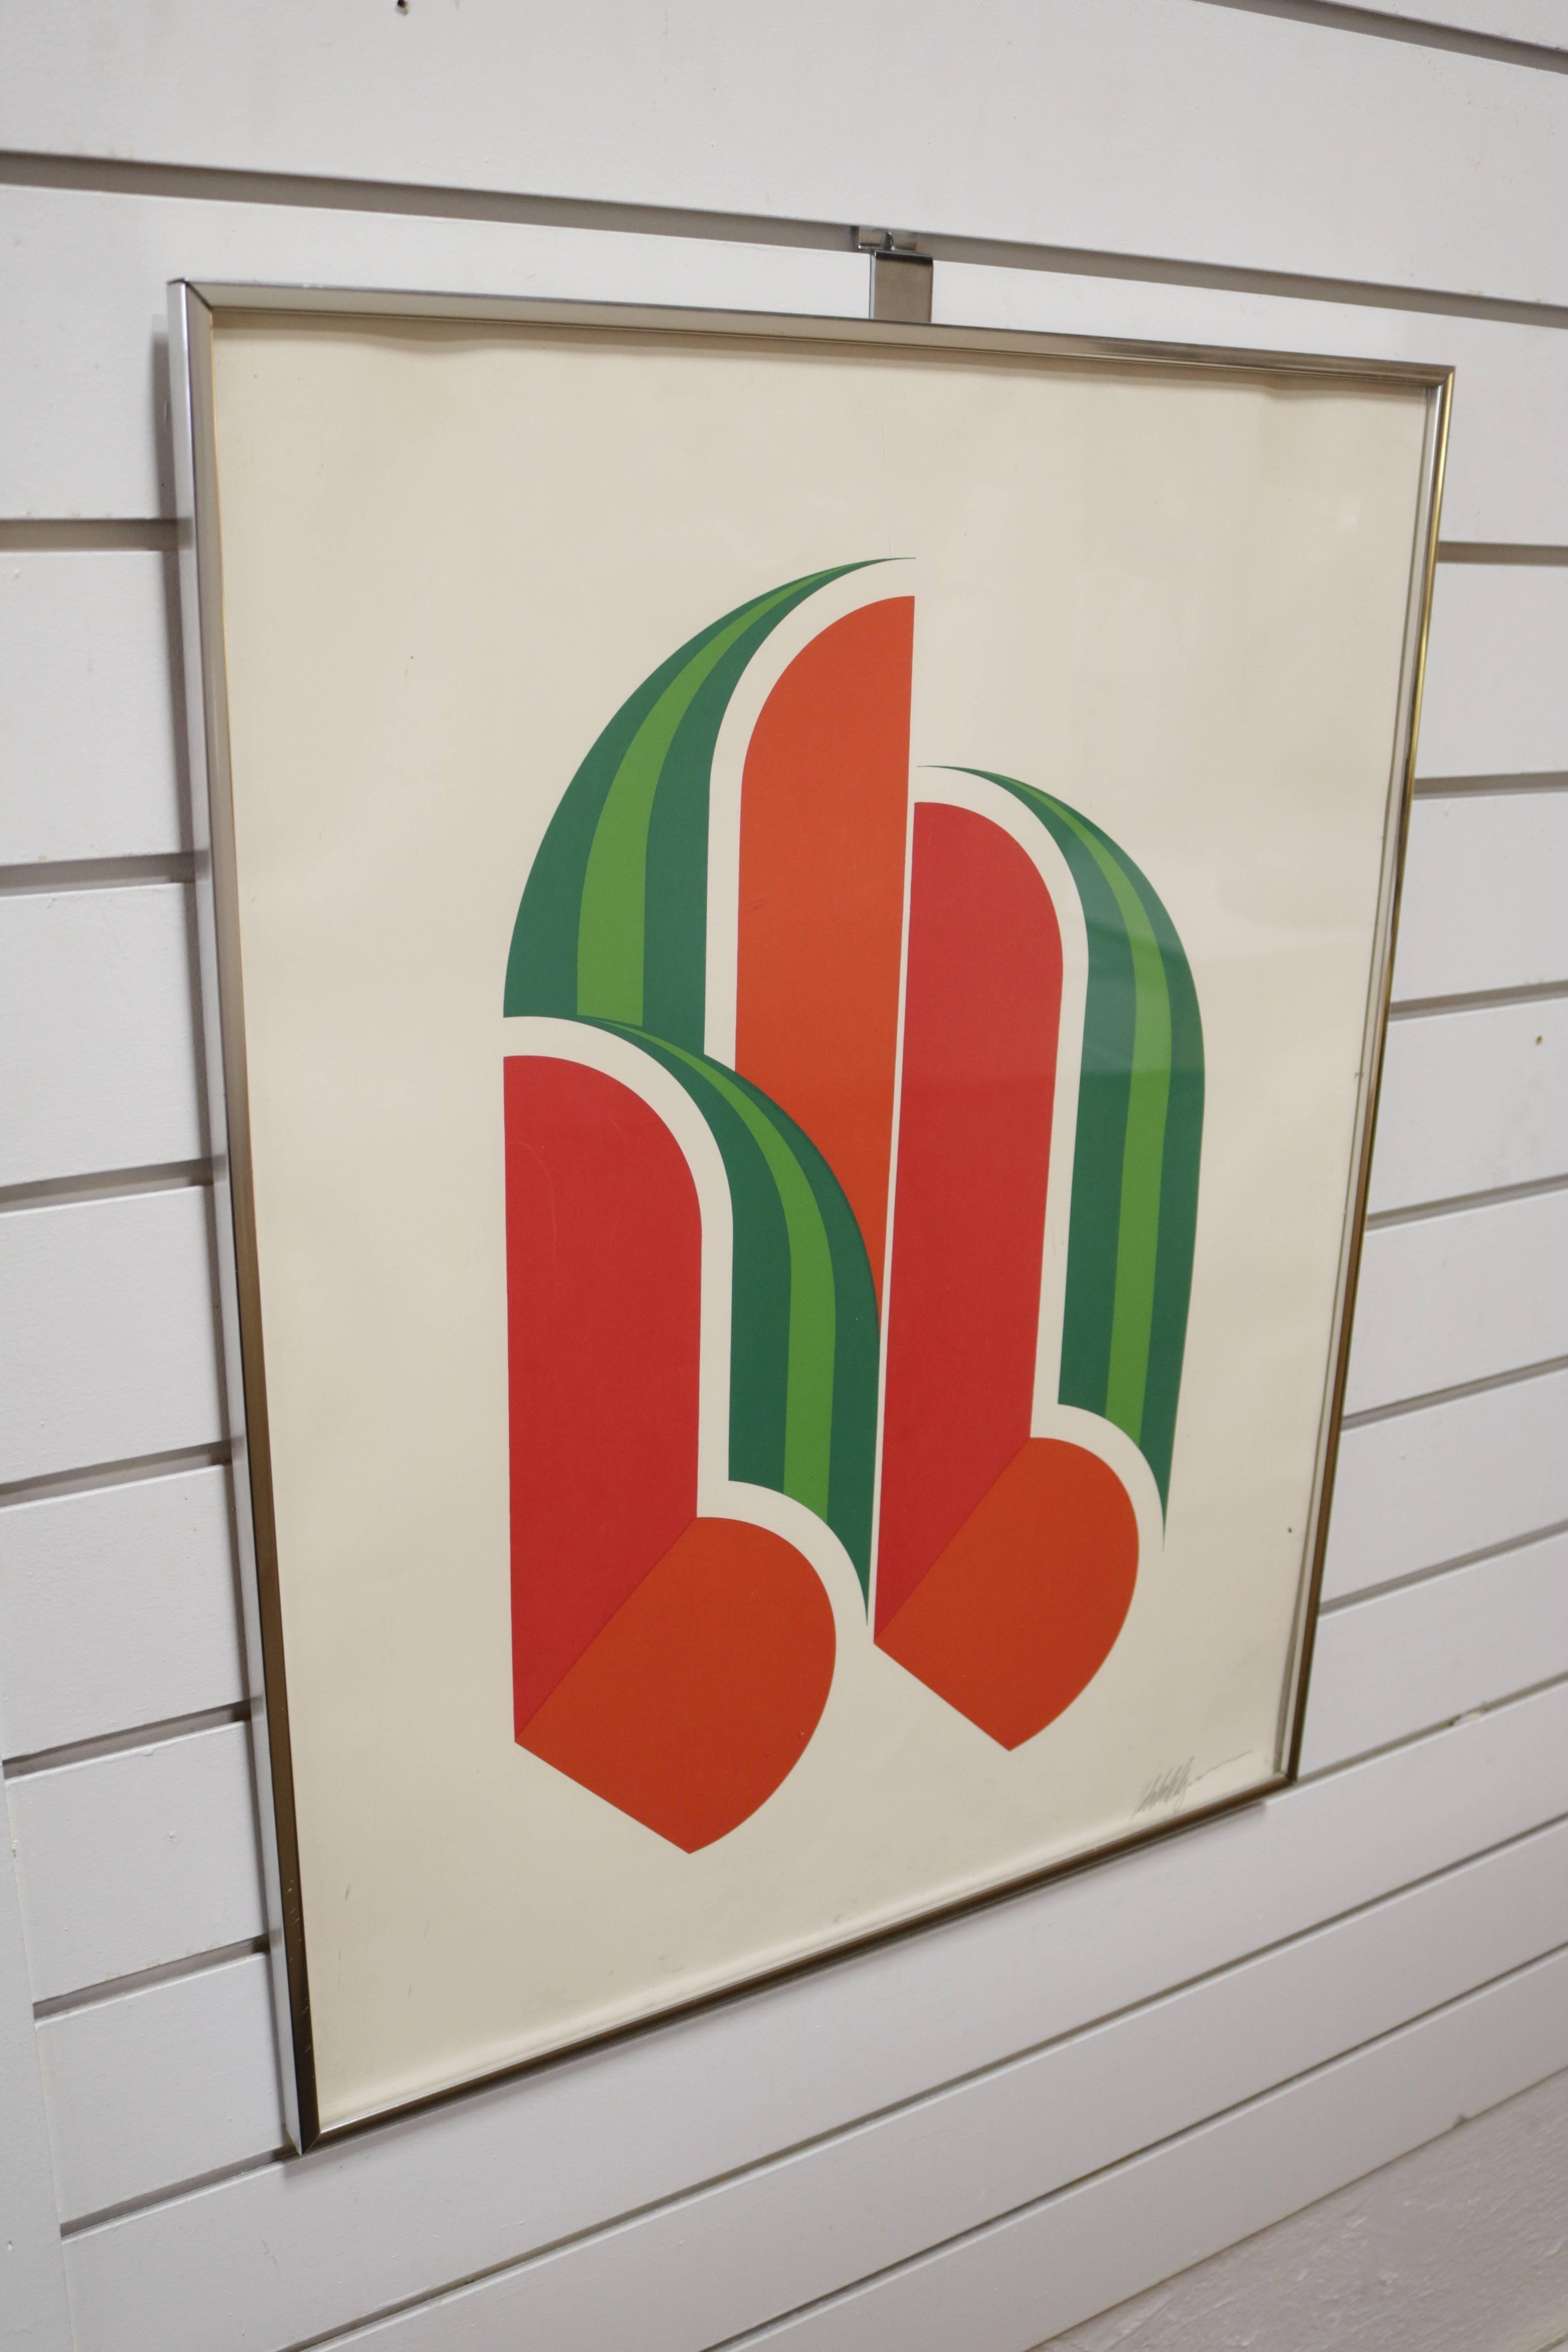 Framed lithograph print of a bisected watermelon done in a graphic Futurist style and sitting in achrome frame. Signed by the artist, however signature is illegible.